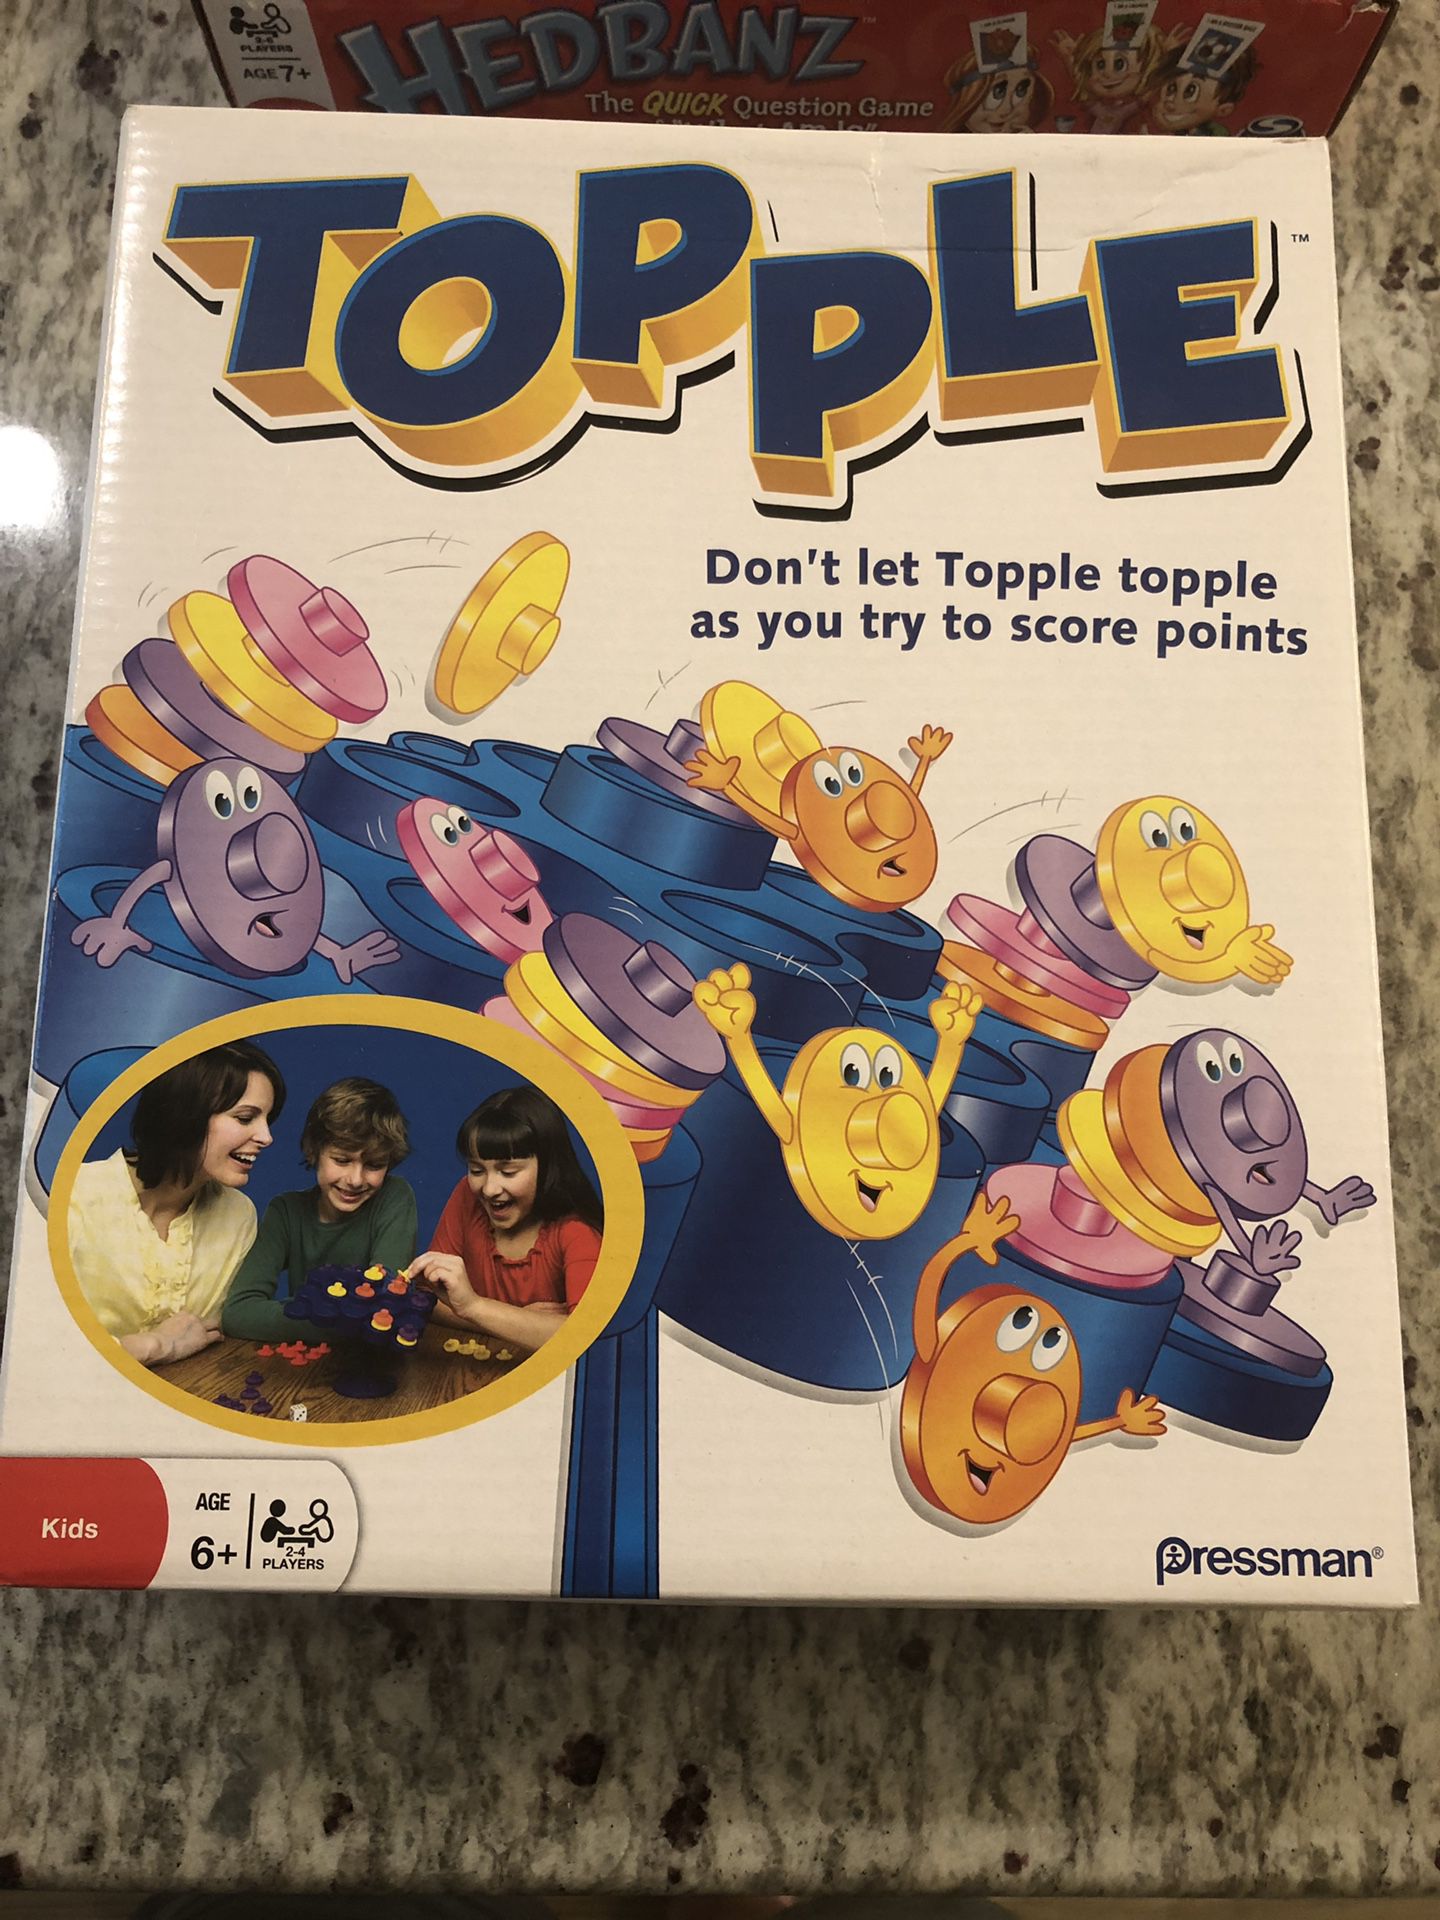 Board games for kids